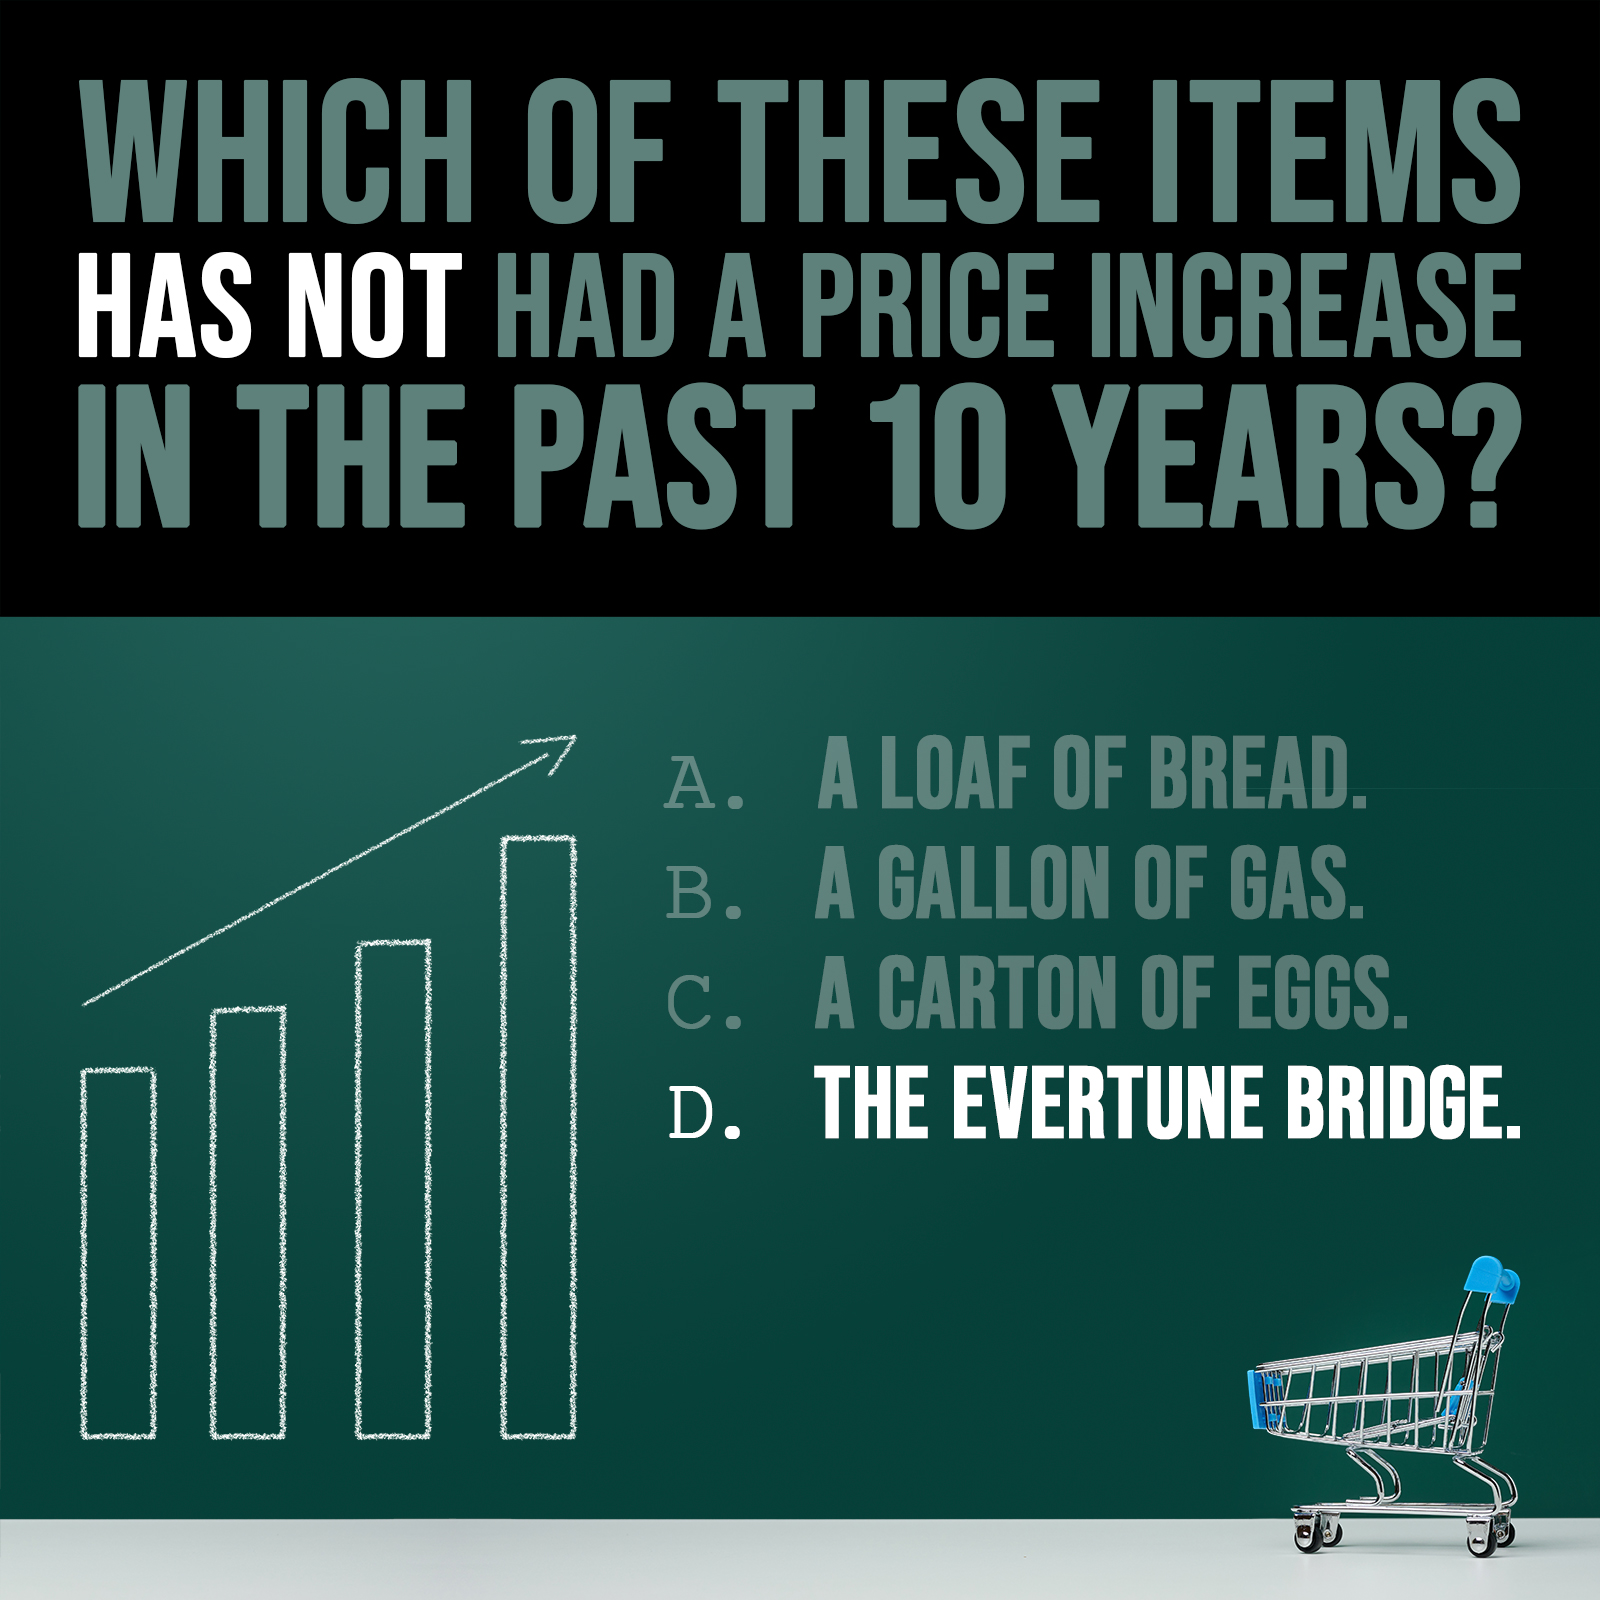 Question: Which of these items has not had a price increase in the last ten years?